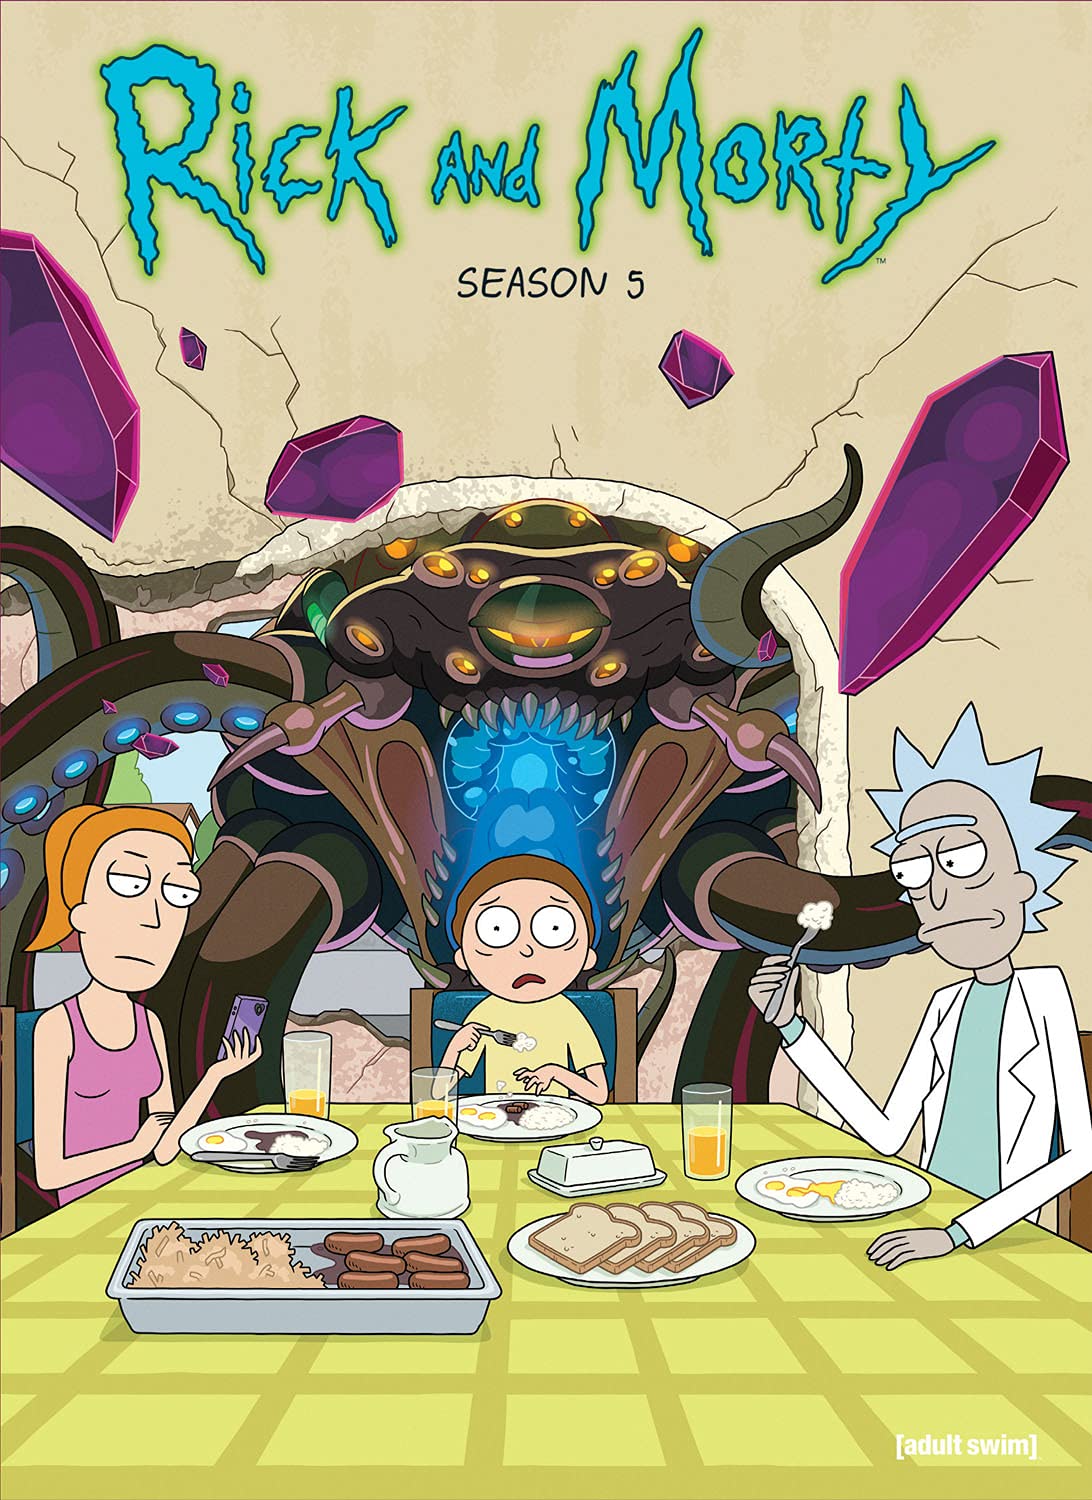 Rick and Morty Season 5 Episode 6 Voice Cast: Special Guests